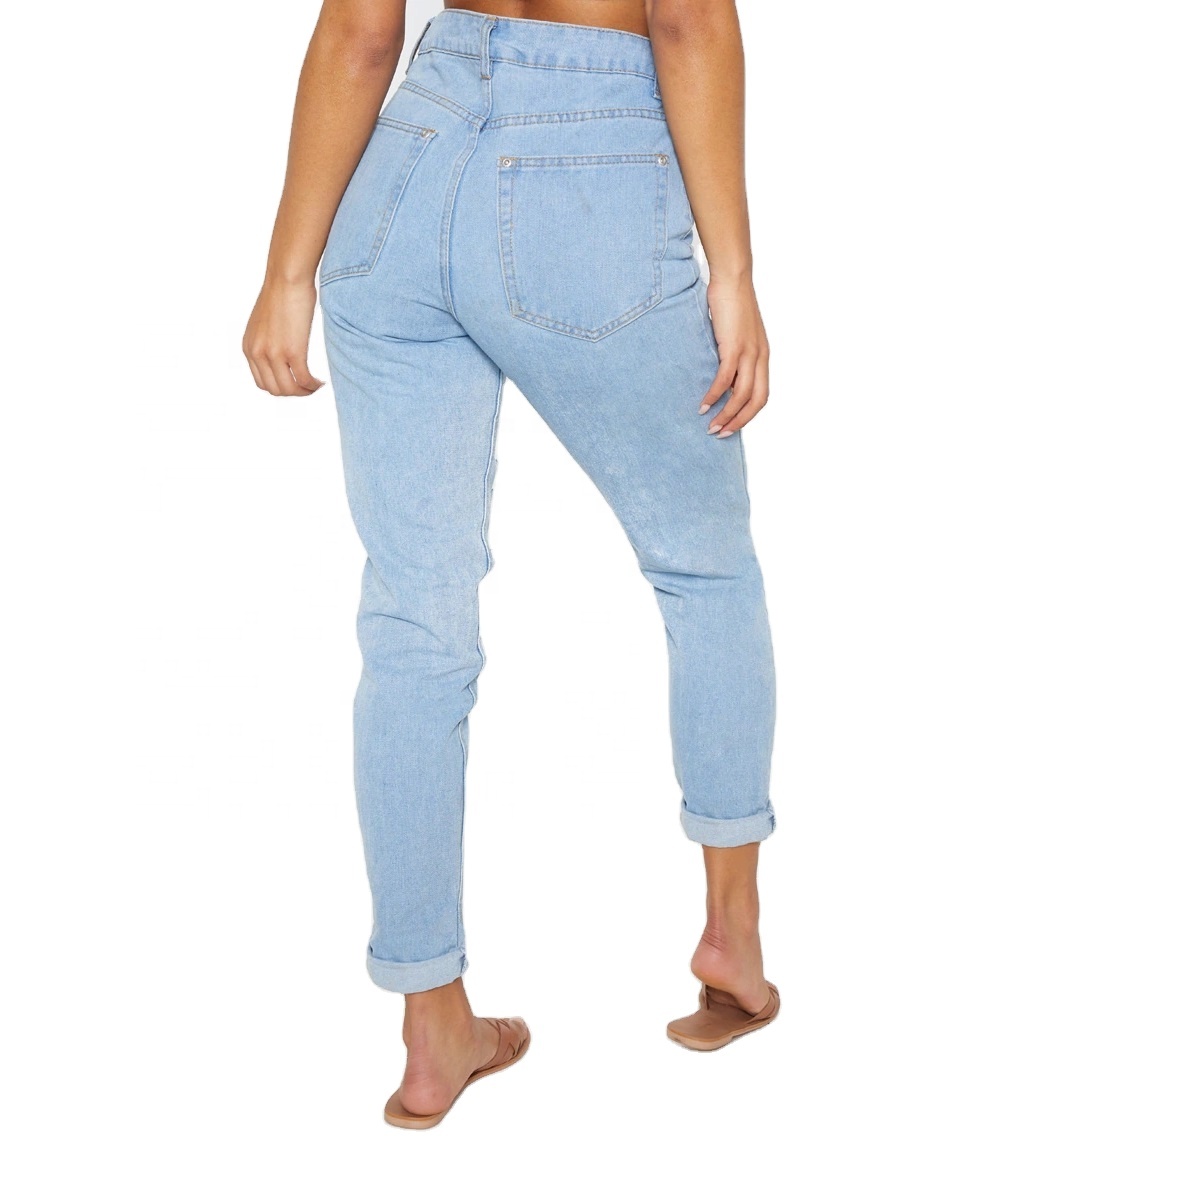 high quality jeans light blue ankle length distressed baggy jeans harem jeans women